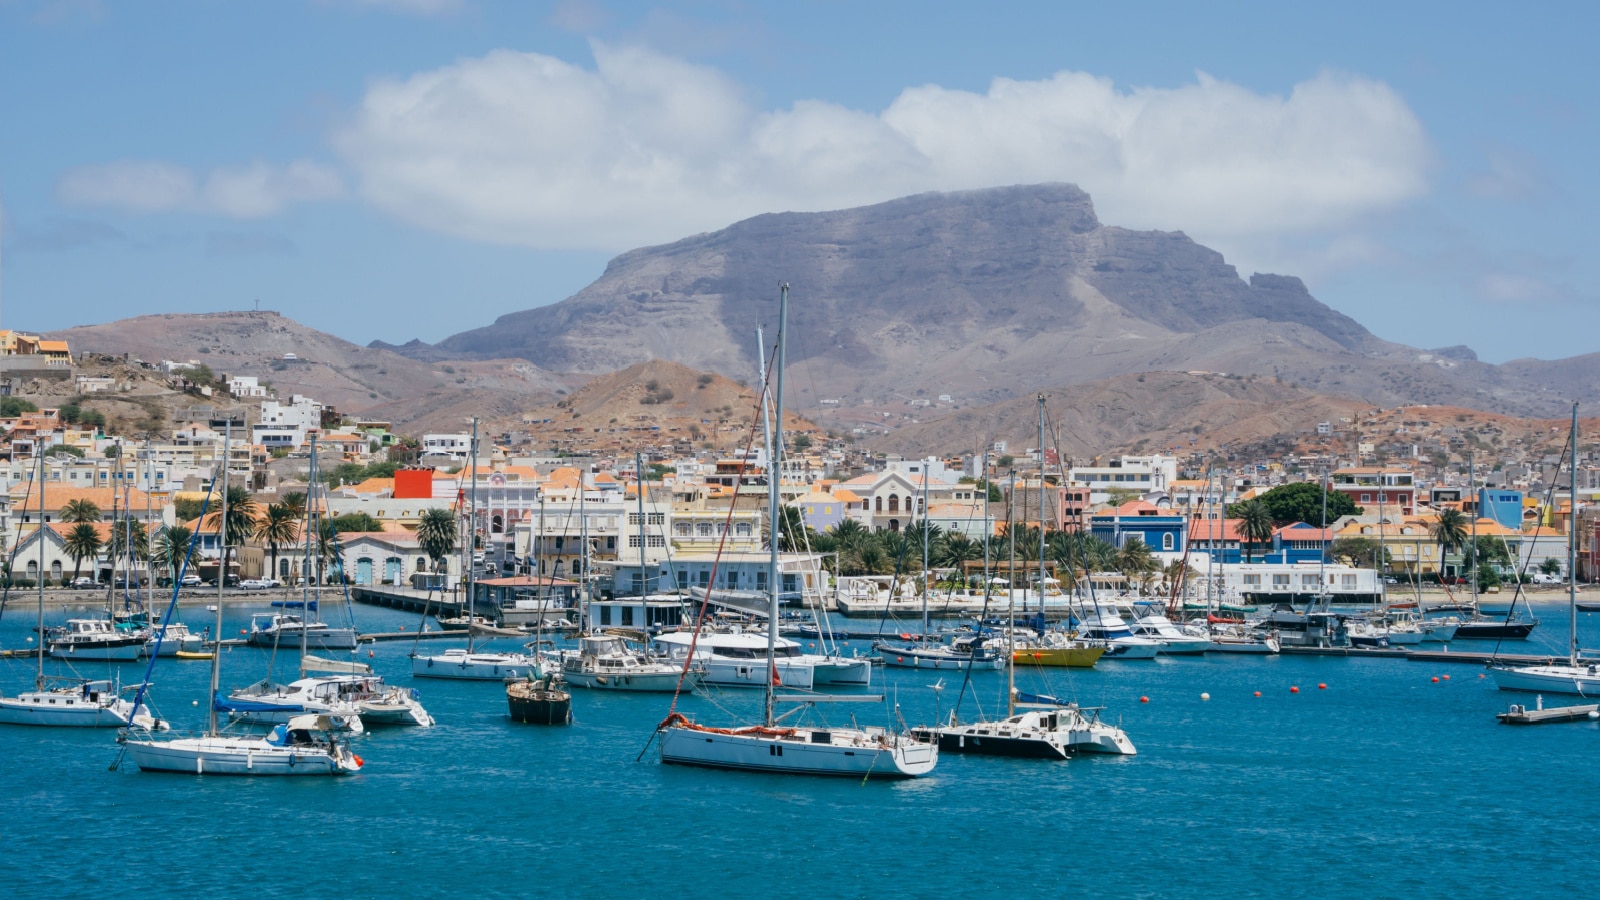 The sailboats in the bay against the background of Mindelo city and the brown mountain in a sunny day on Sao Vicente island in Cape Verde.